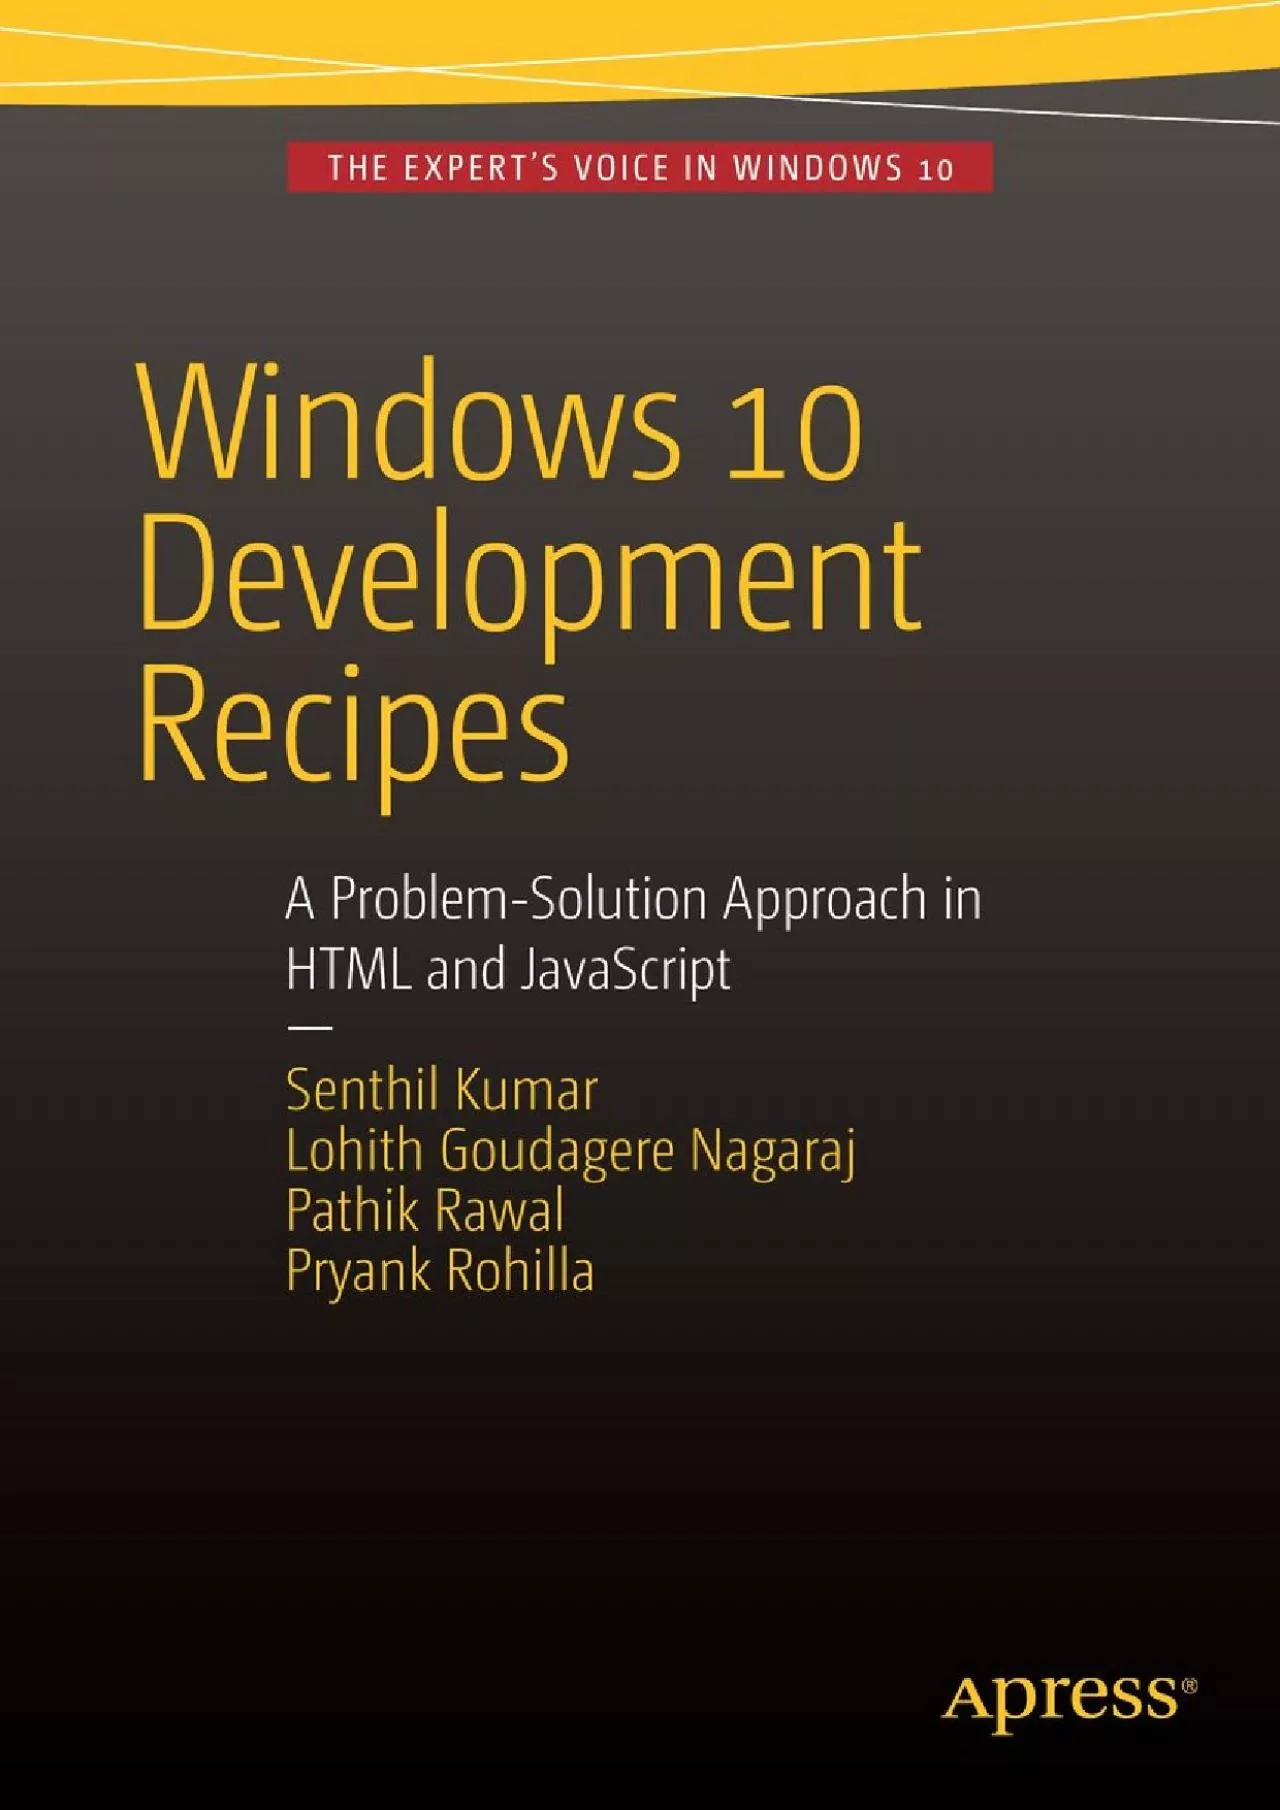 [READING BOOK]-Windows 10 Development Recipes: A Problem-Solution Approach in HTML and